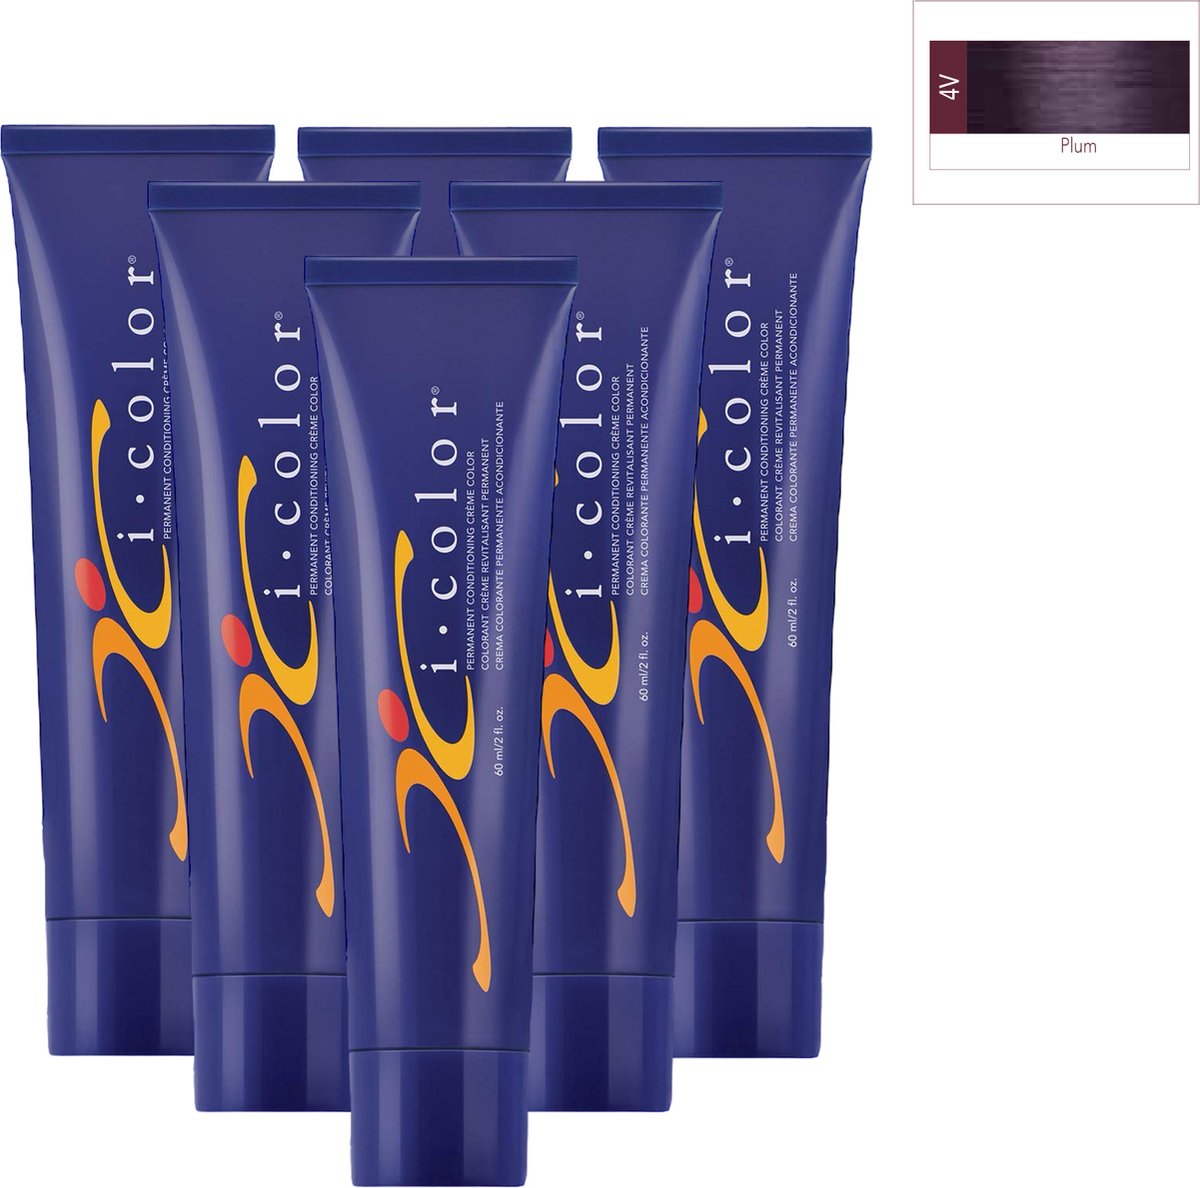 ISO i color Permanent Conditioning Crème Color 60ml 4V Plum x 6 tubes